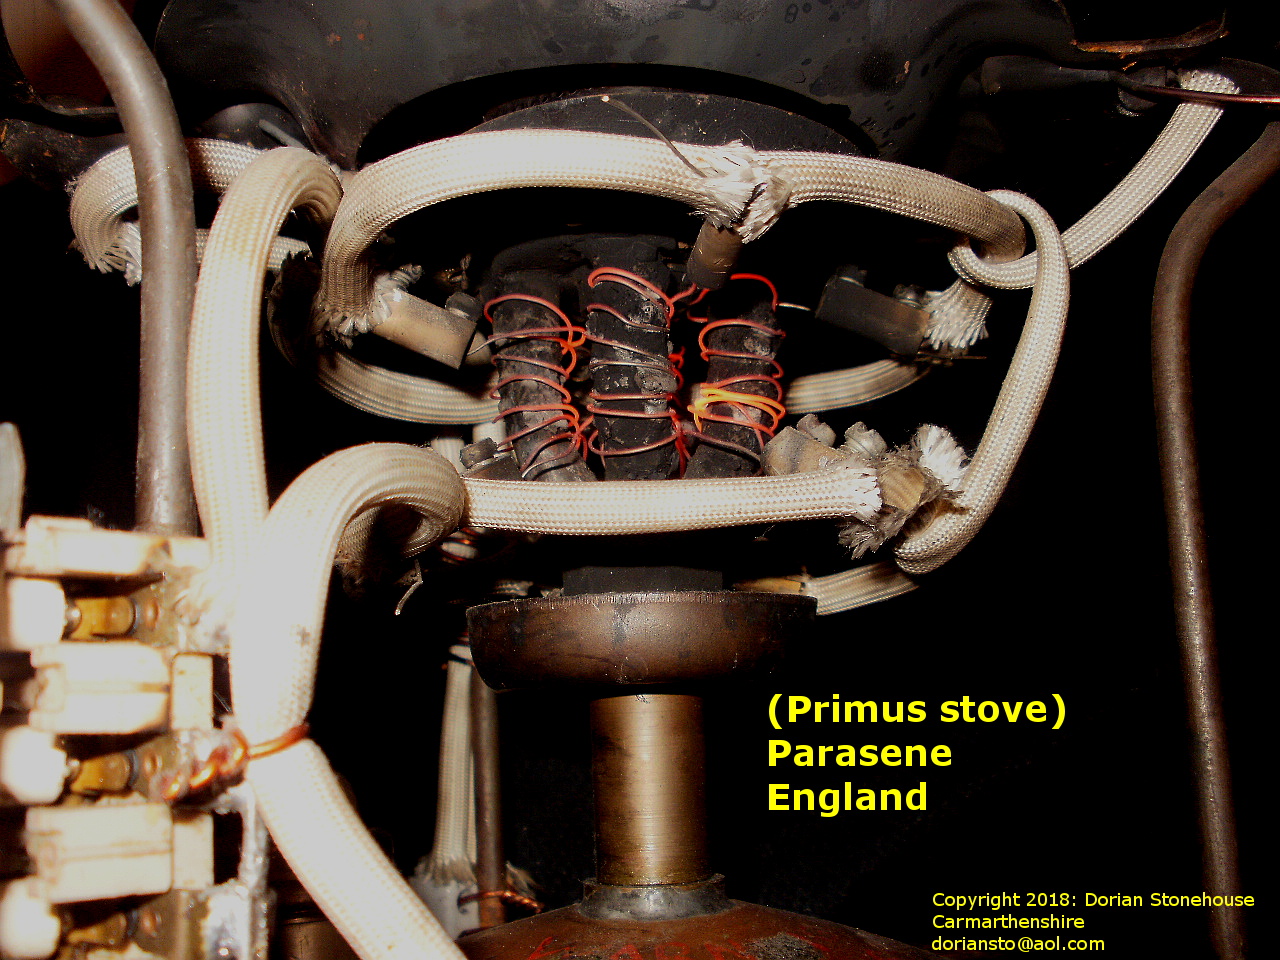 The Primus (Parasene) stove with electrical heating element alight